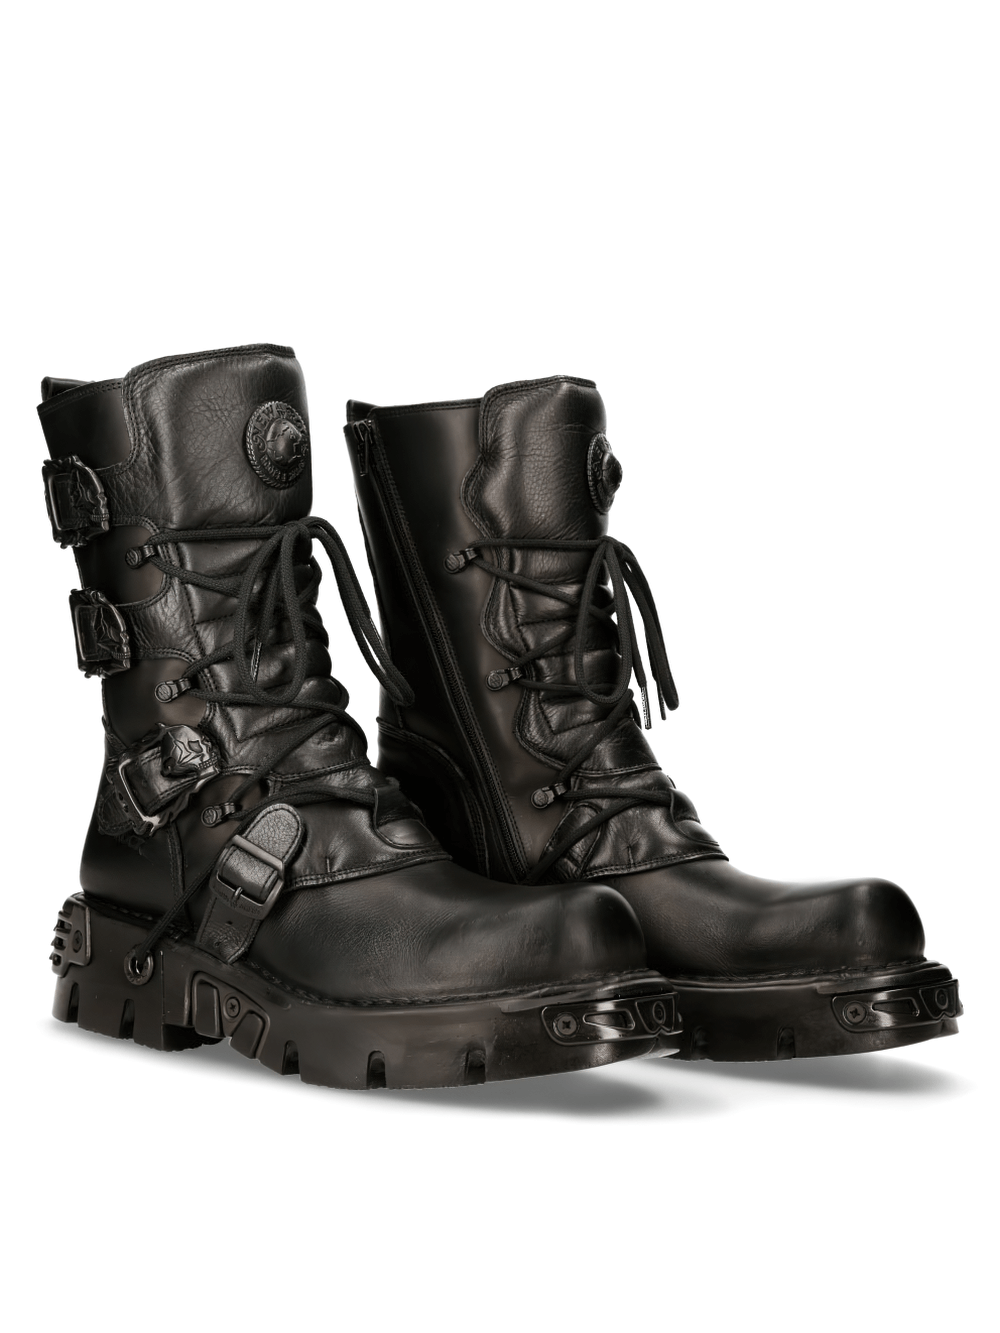 NEW ROCK Rugged Lace-Up Military Boots with Buckles